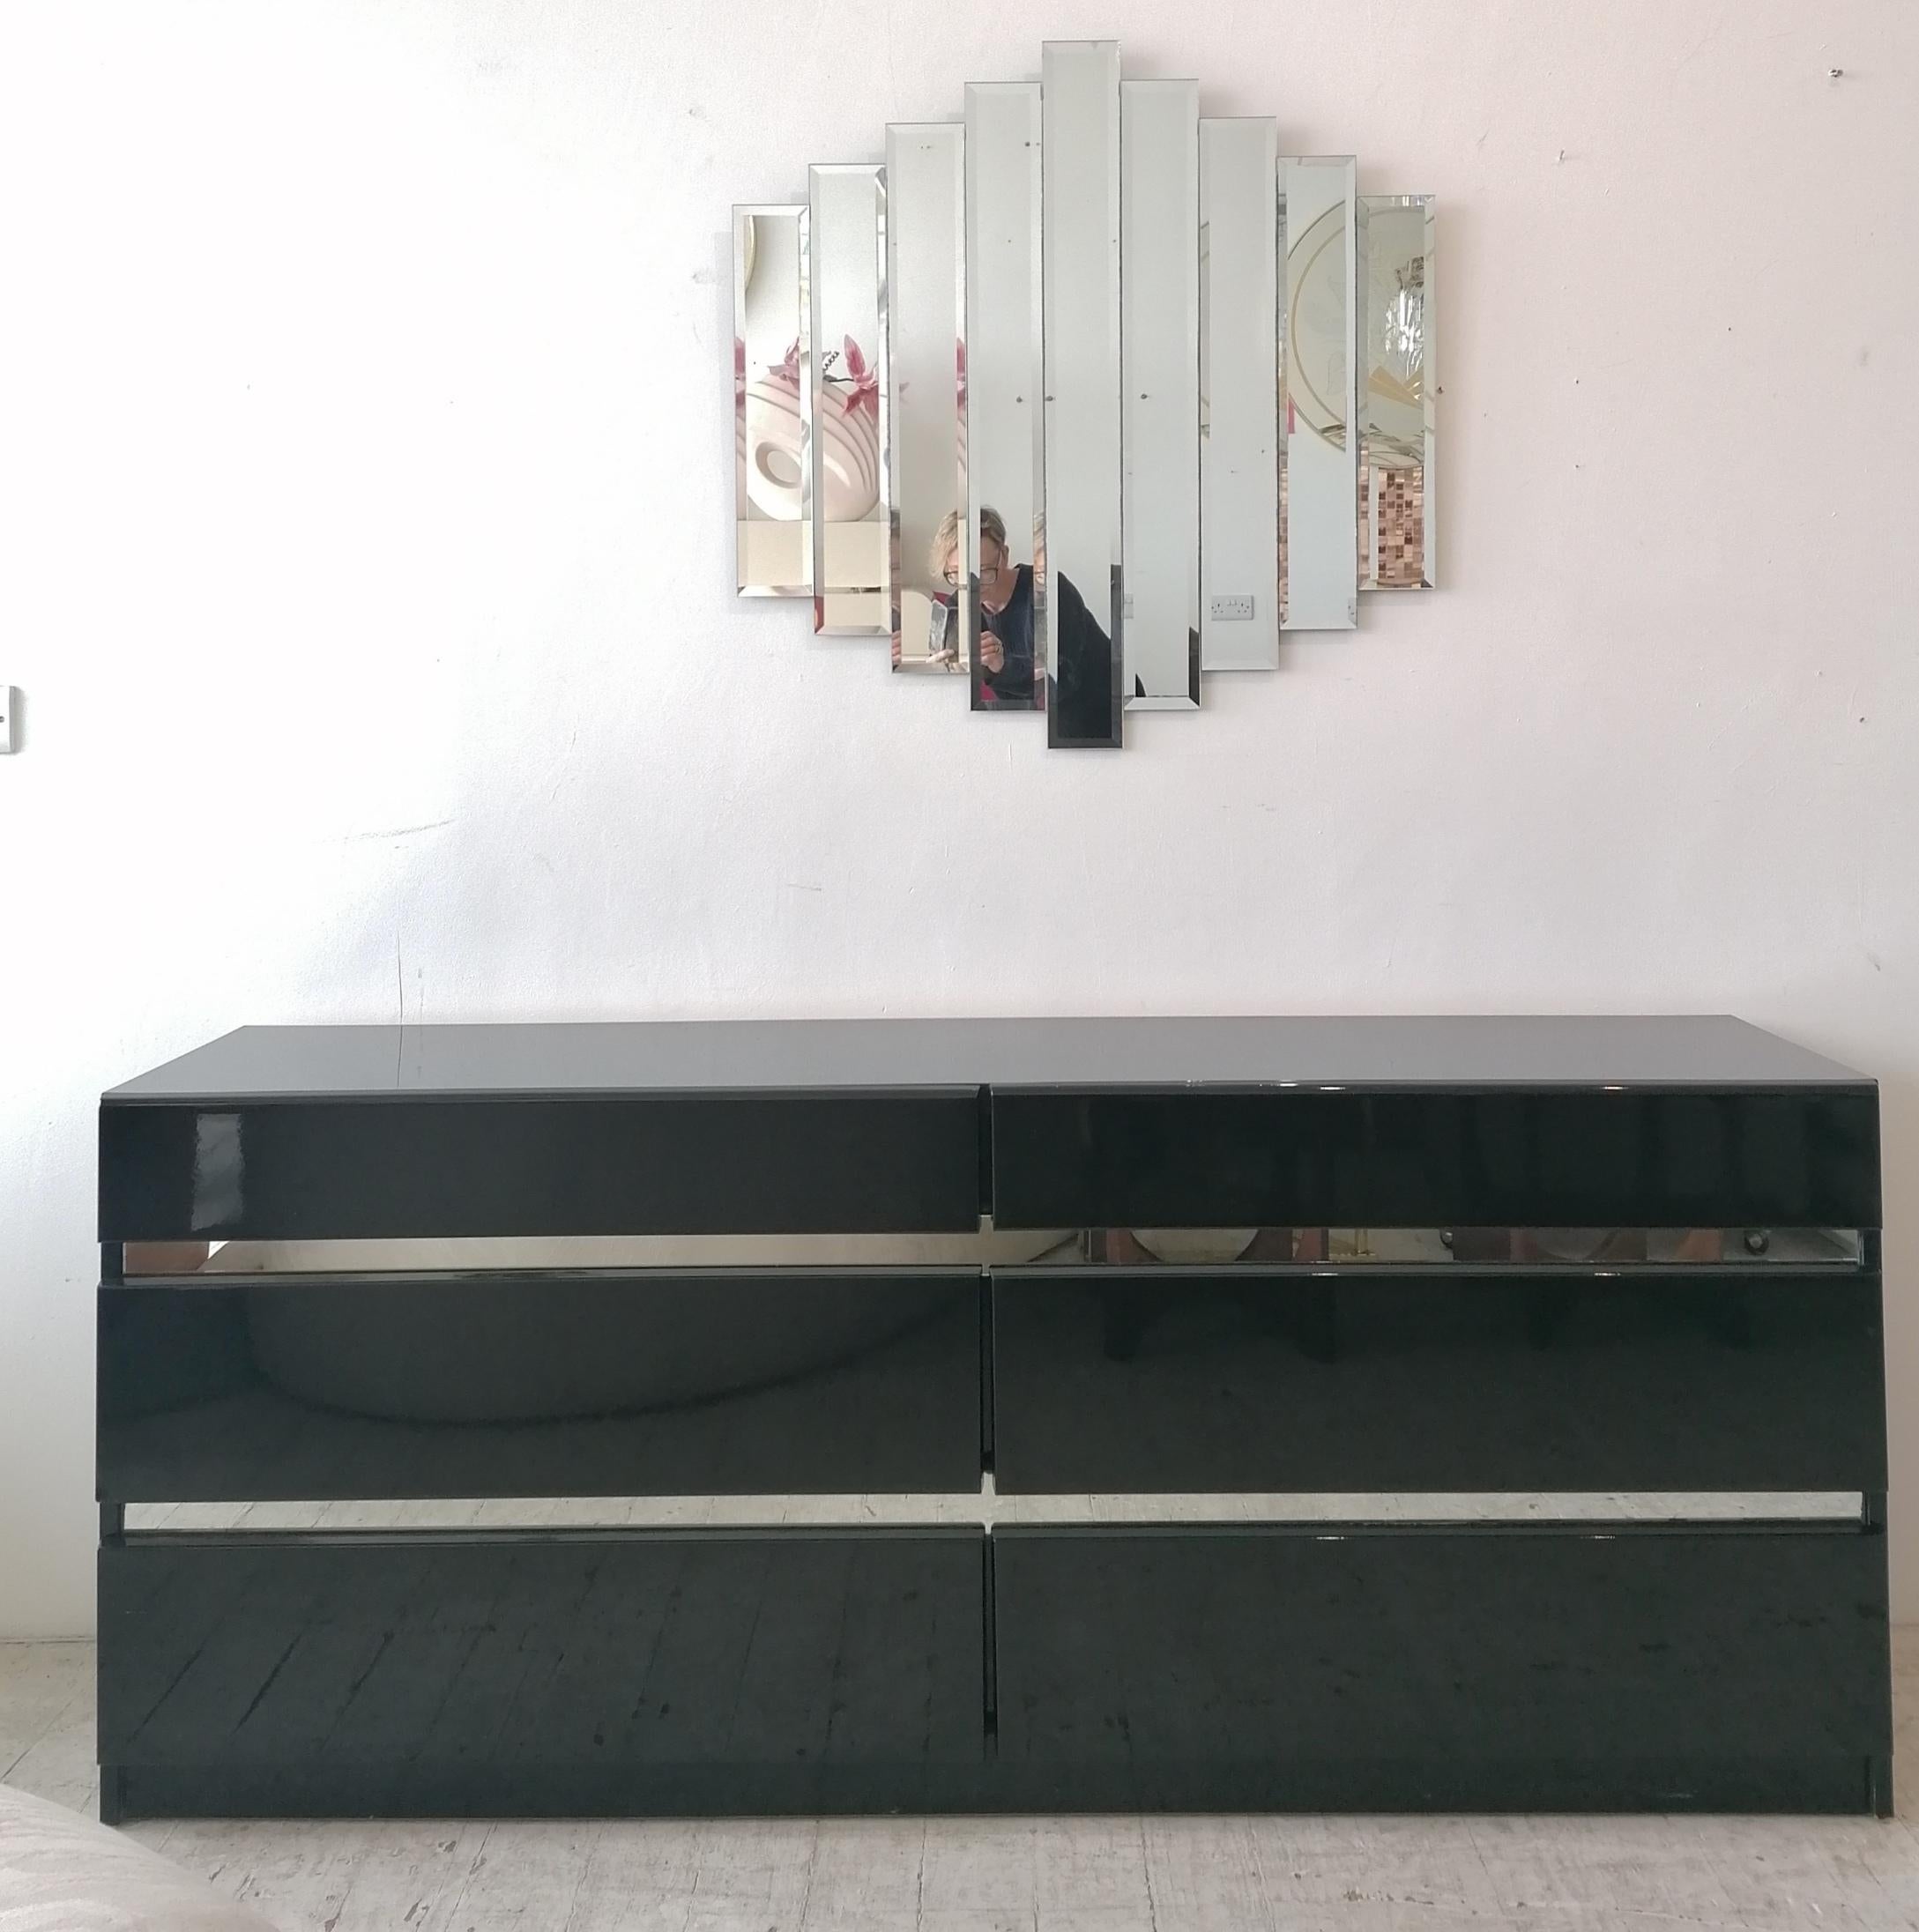 1980s art deco revival black lacquer sideboard with drawers / dresser, by Millennium, USA. Looks like chrome edging, but is actually mirror glass. In great vintage condition, ie very minor scuffs and scratches. See video for clearest view.

We also